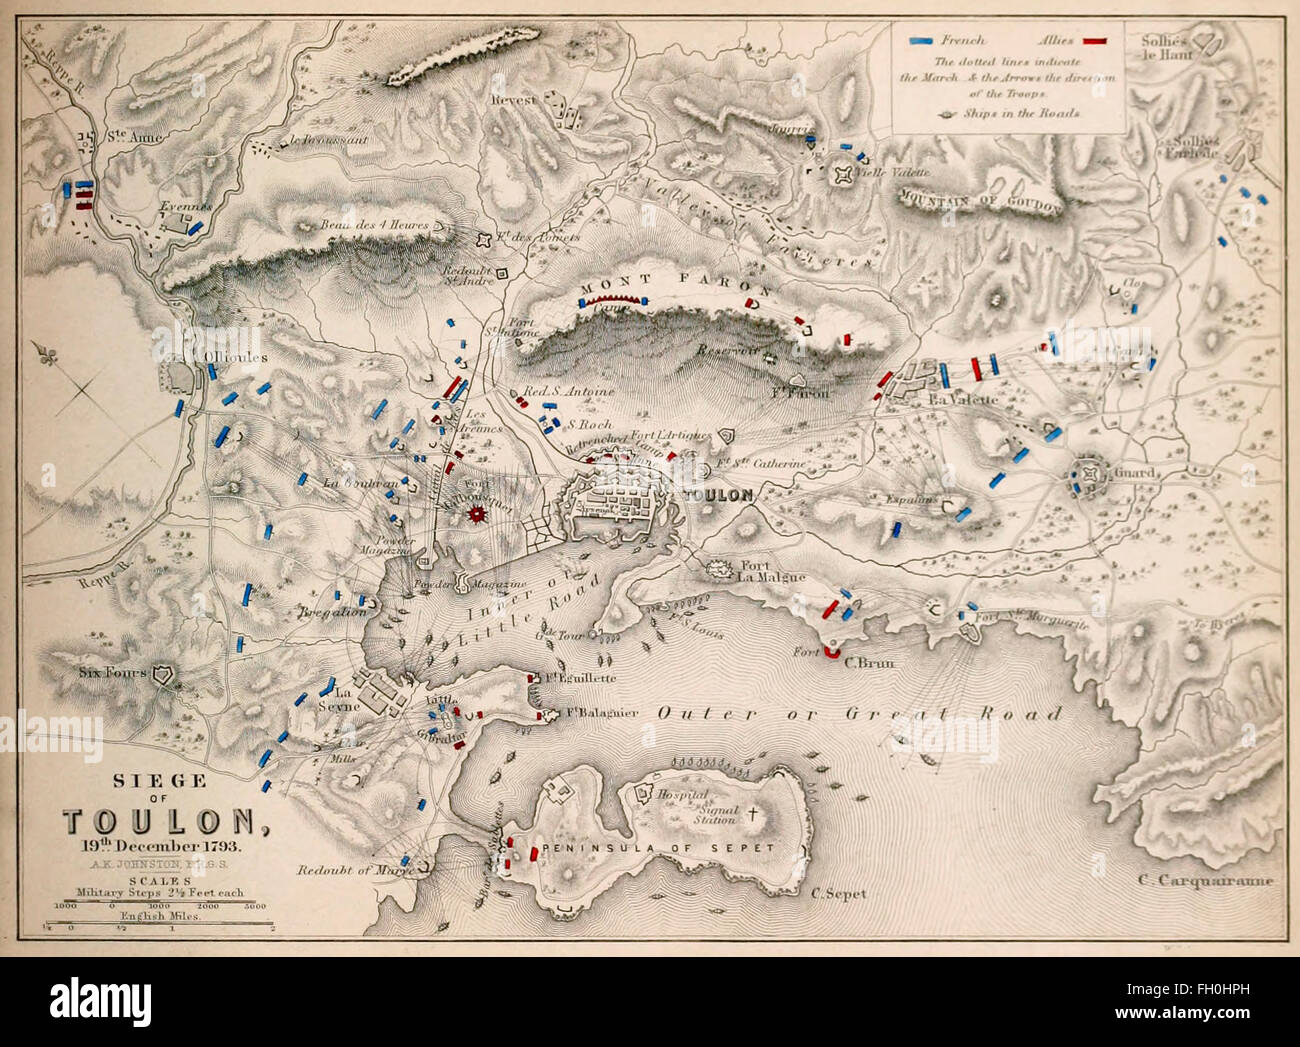 Map of Siege of Toulon - 19th December 1793. The Siege of Toulon (8 September - 19 December 1793) was an early Republican victory over a Royalist rebellion in the southern French city of Toulon. It is also called the Fall of Toulon. Stock Photo